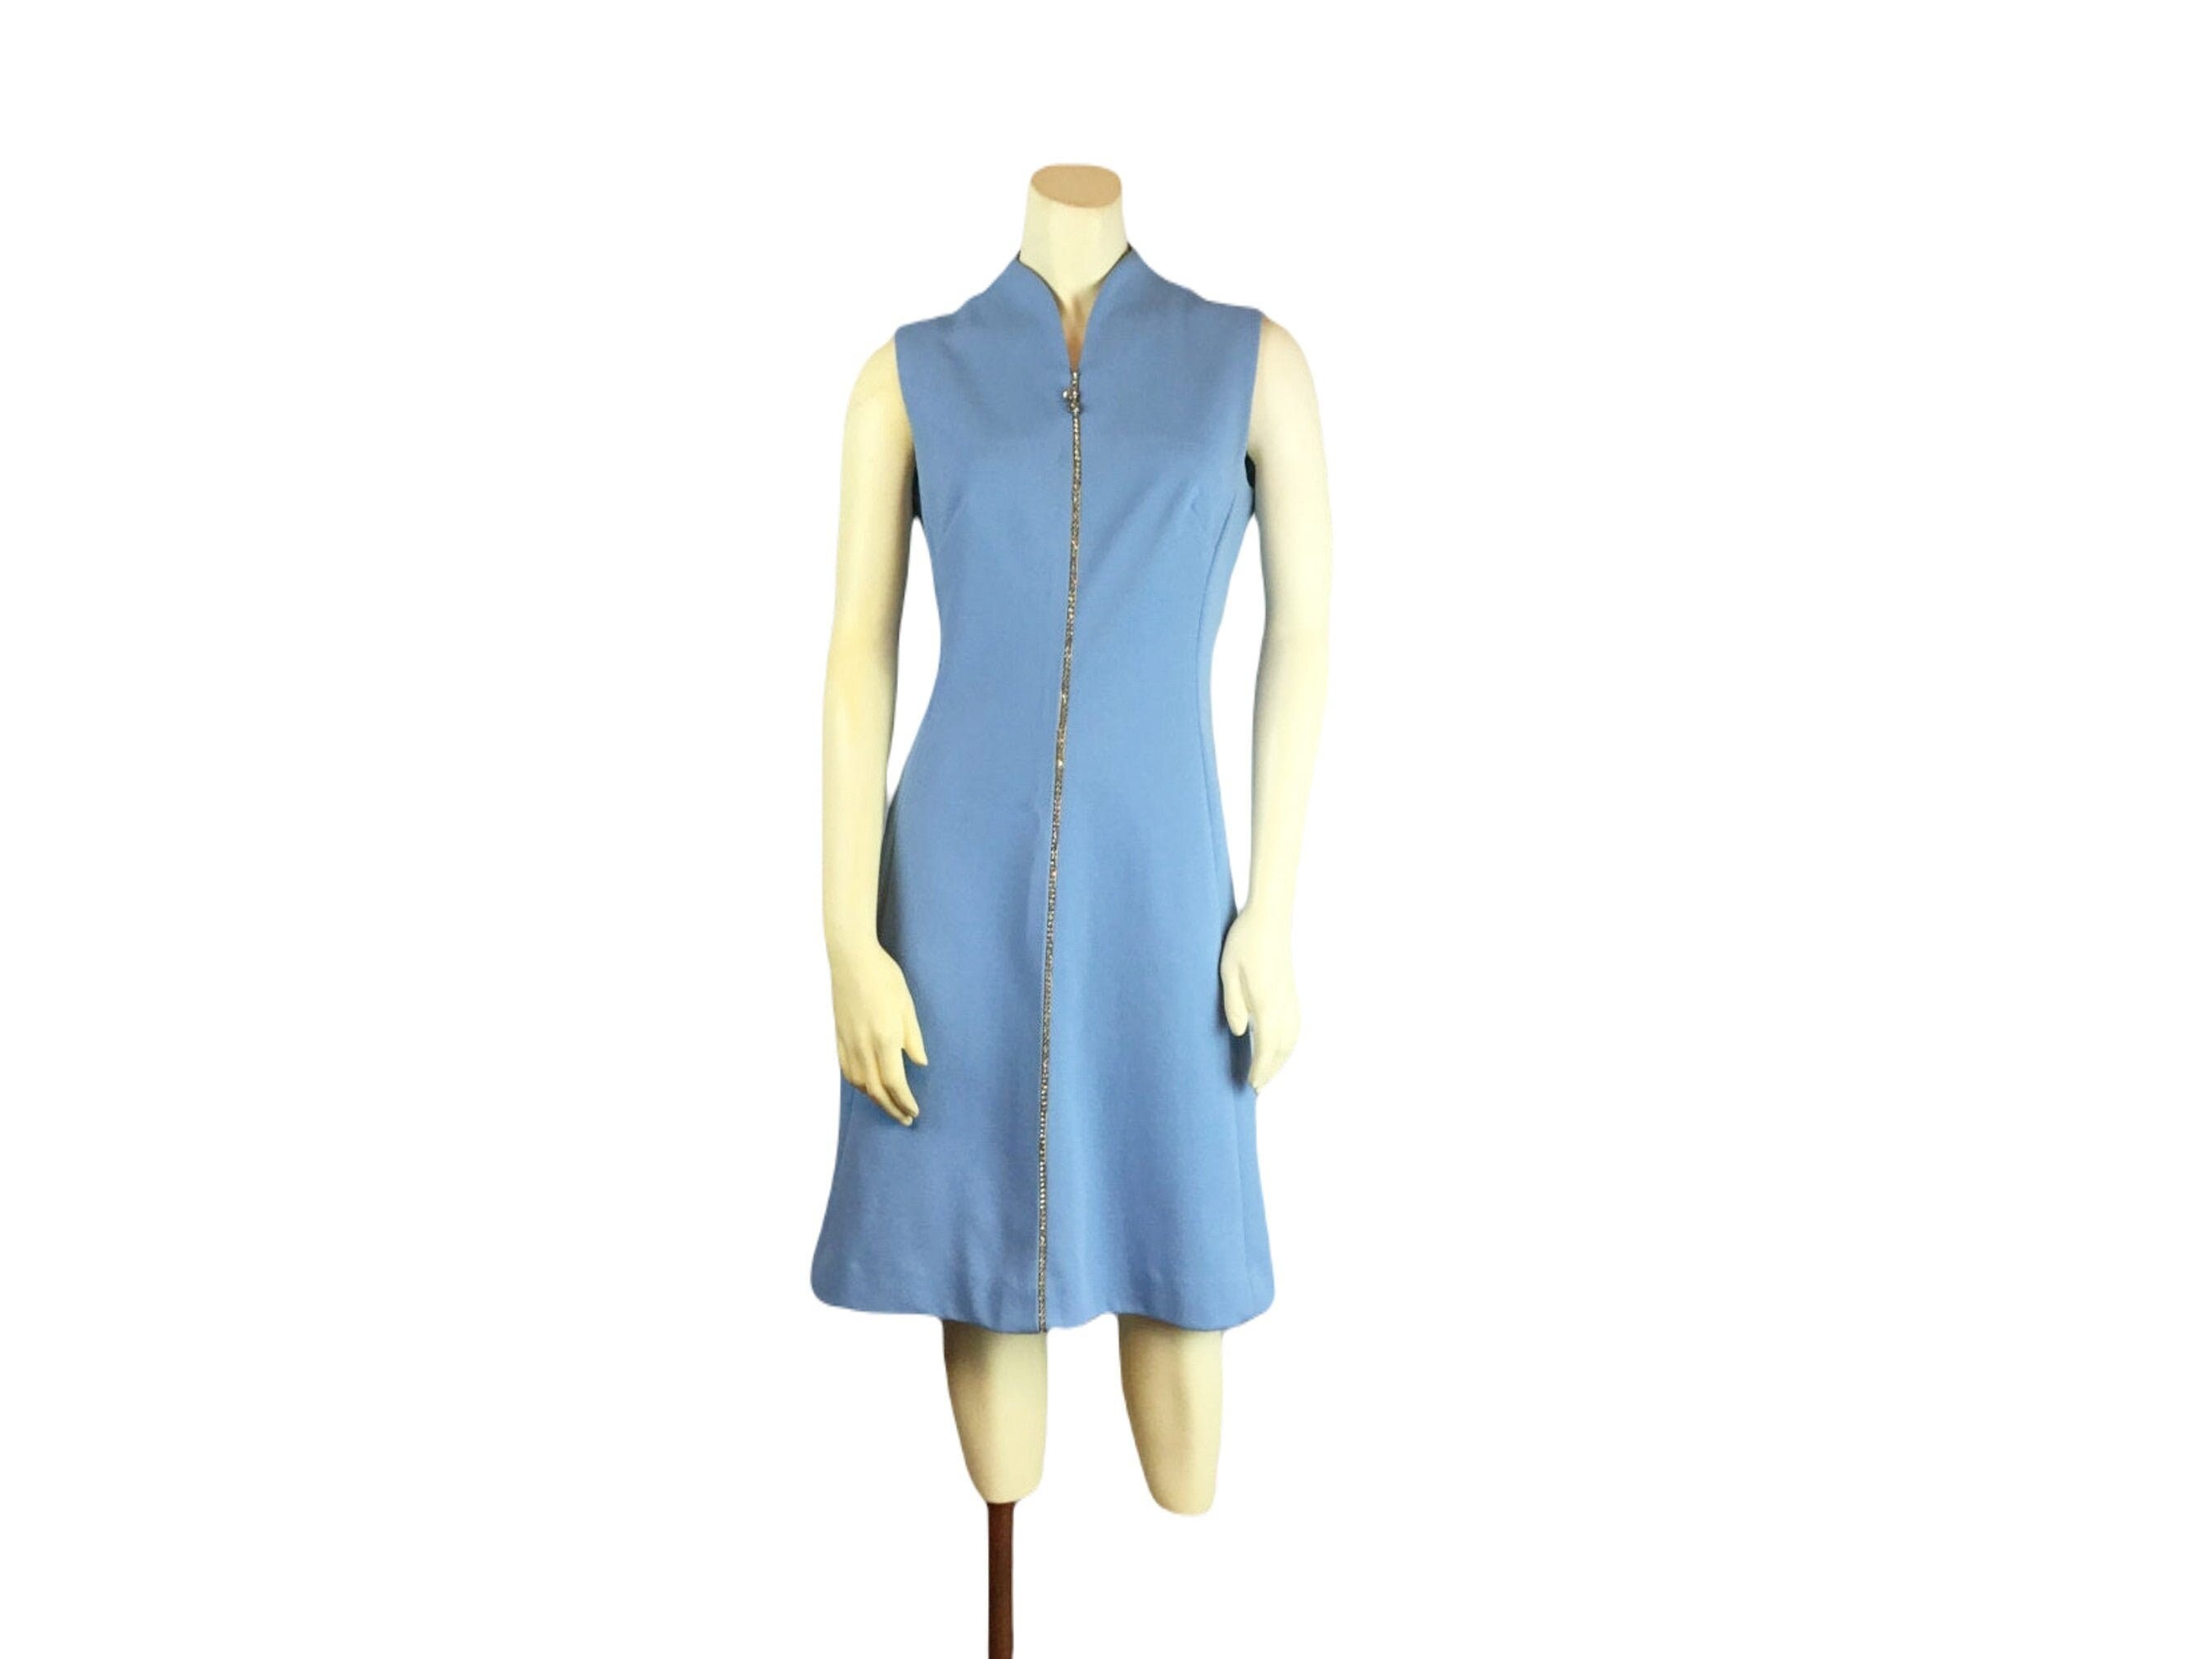 Vintage 1960s Mod Cocktail Dress With Rhinestone Accent / MCM Sky Blue ...